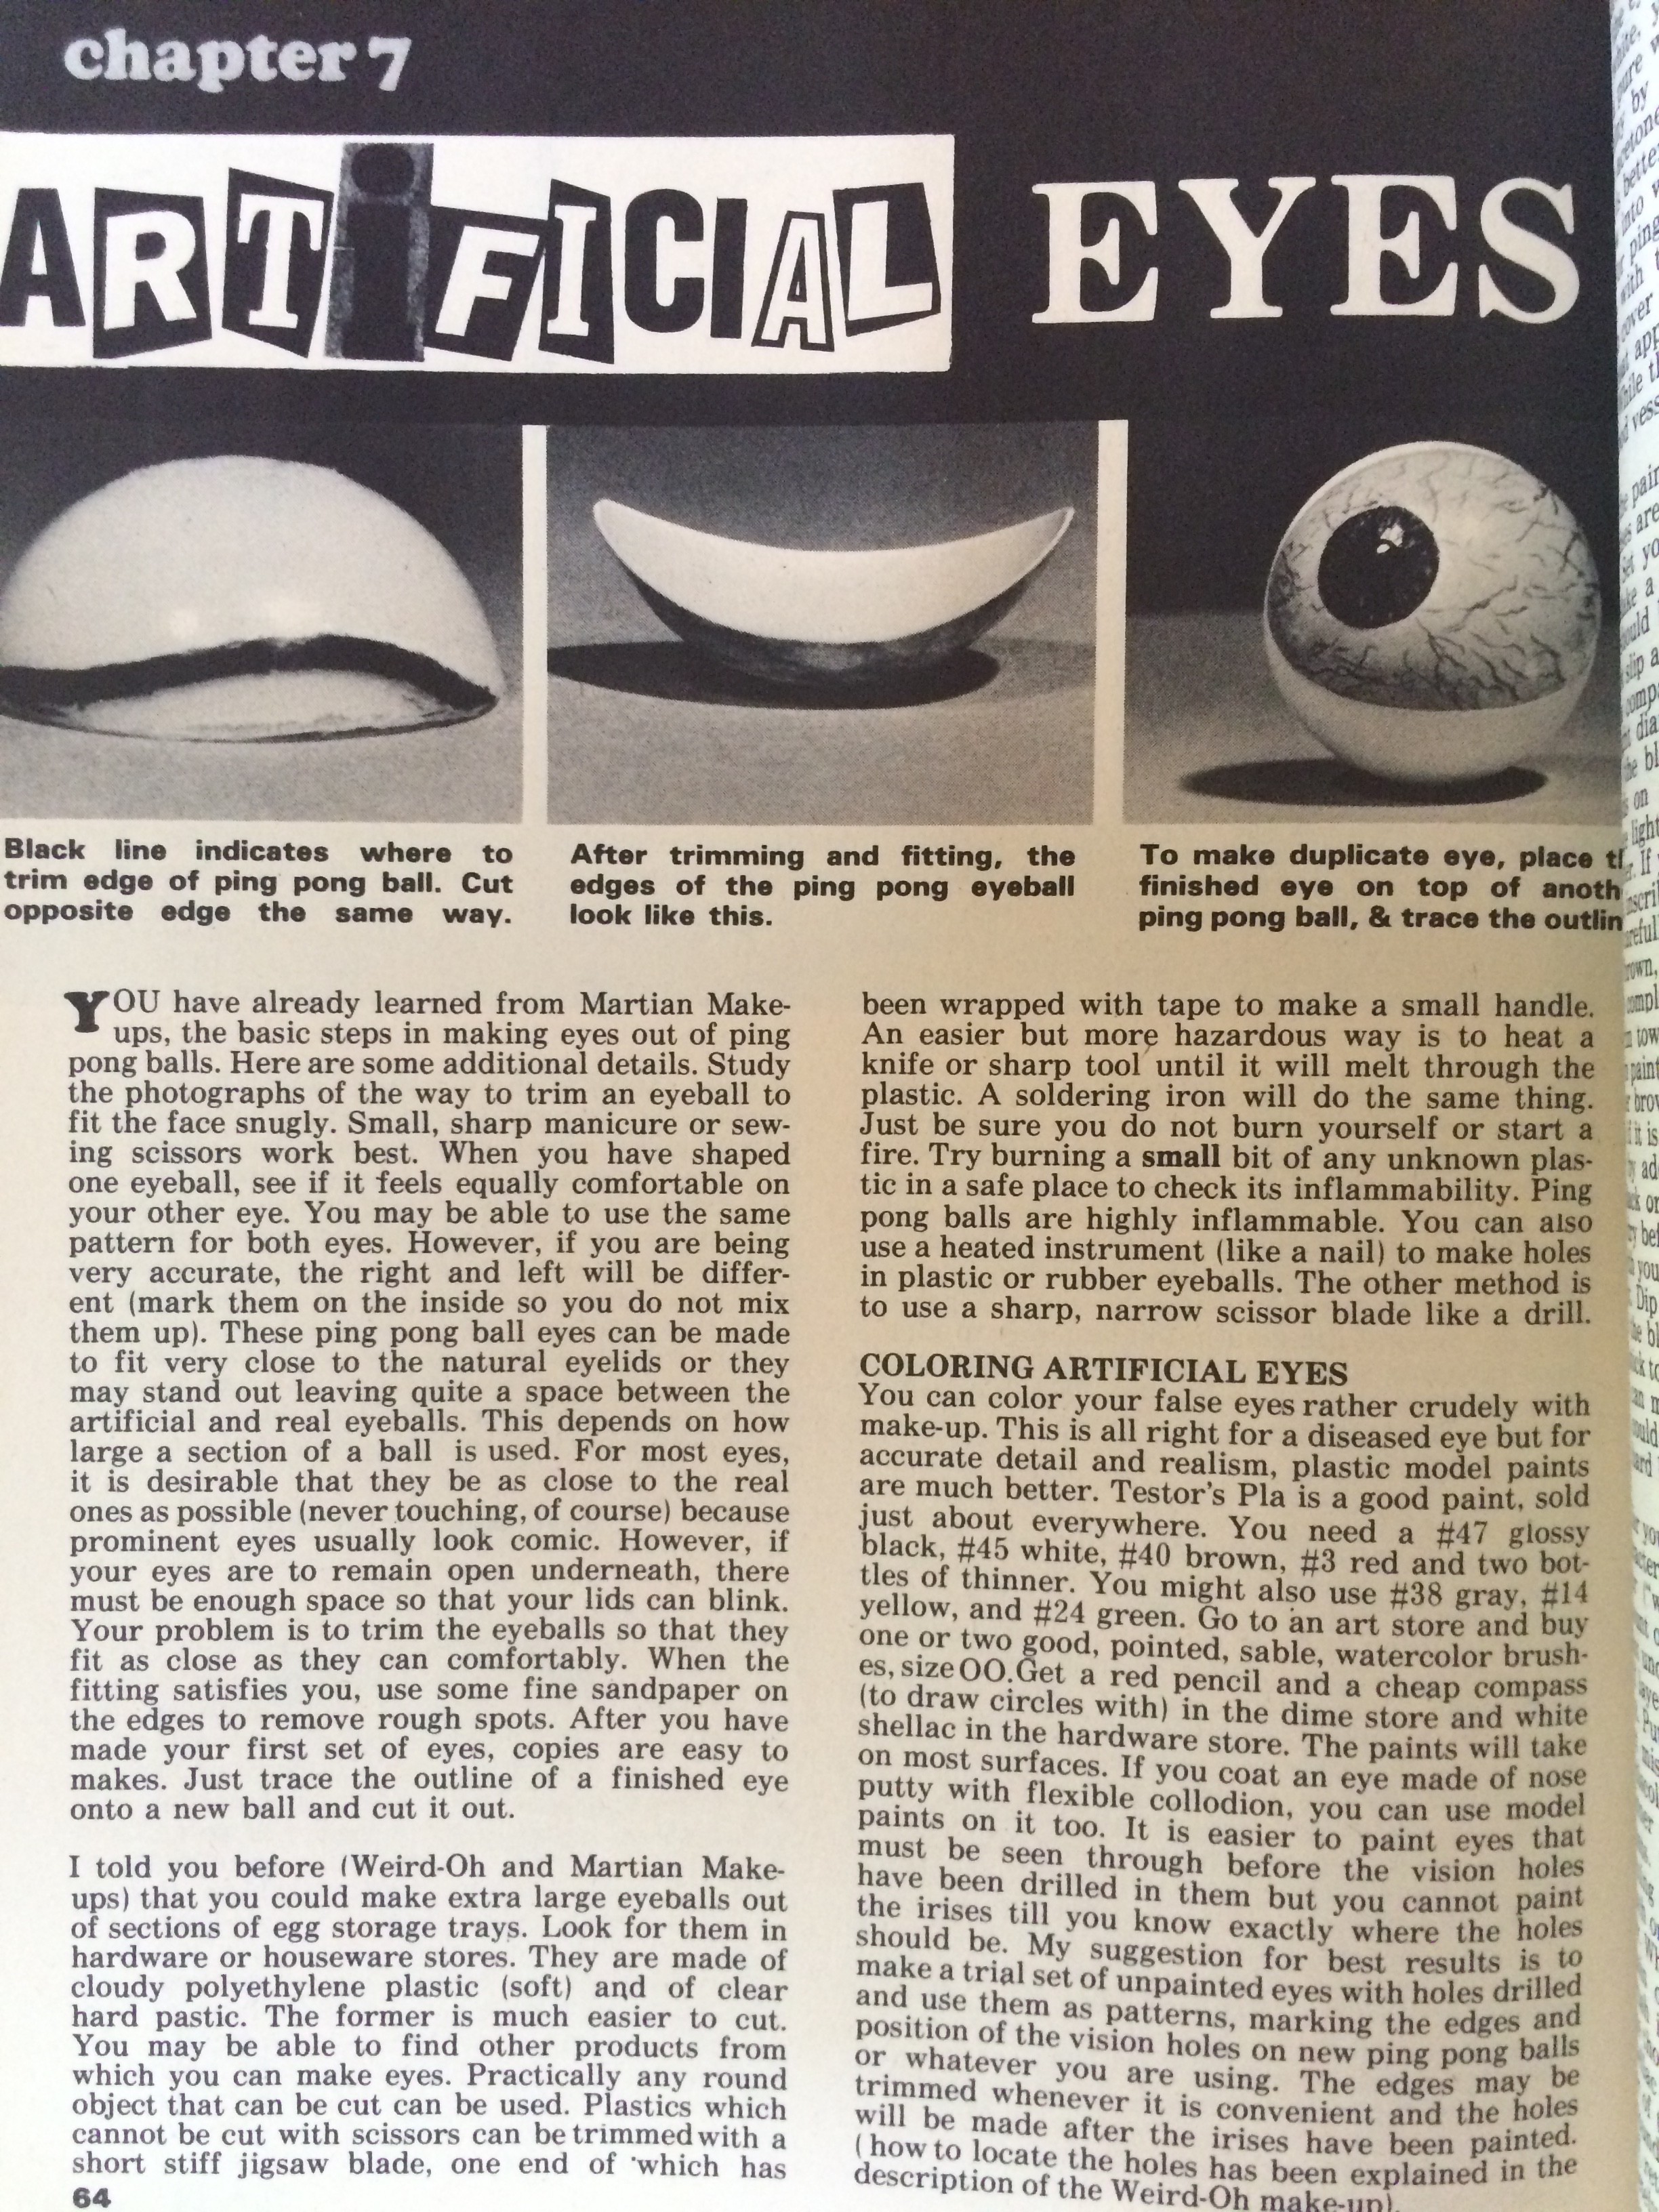 Do-It-Yourself Monster Make-Up Handbook by Dick Smith (Warren Publishing, 1965)